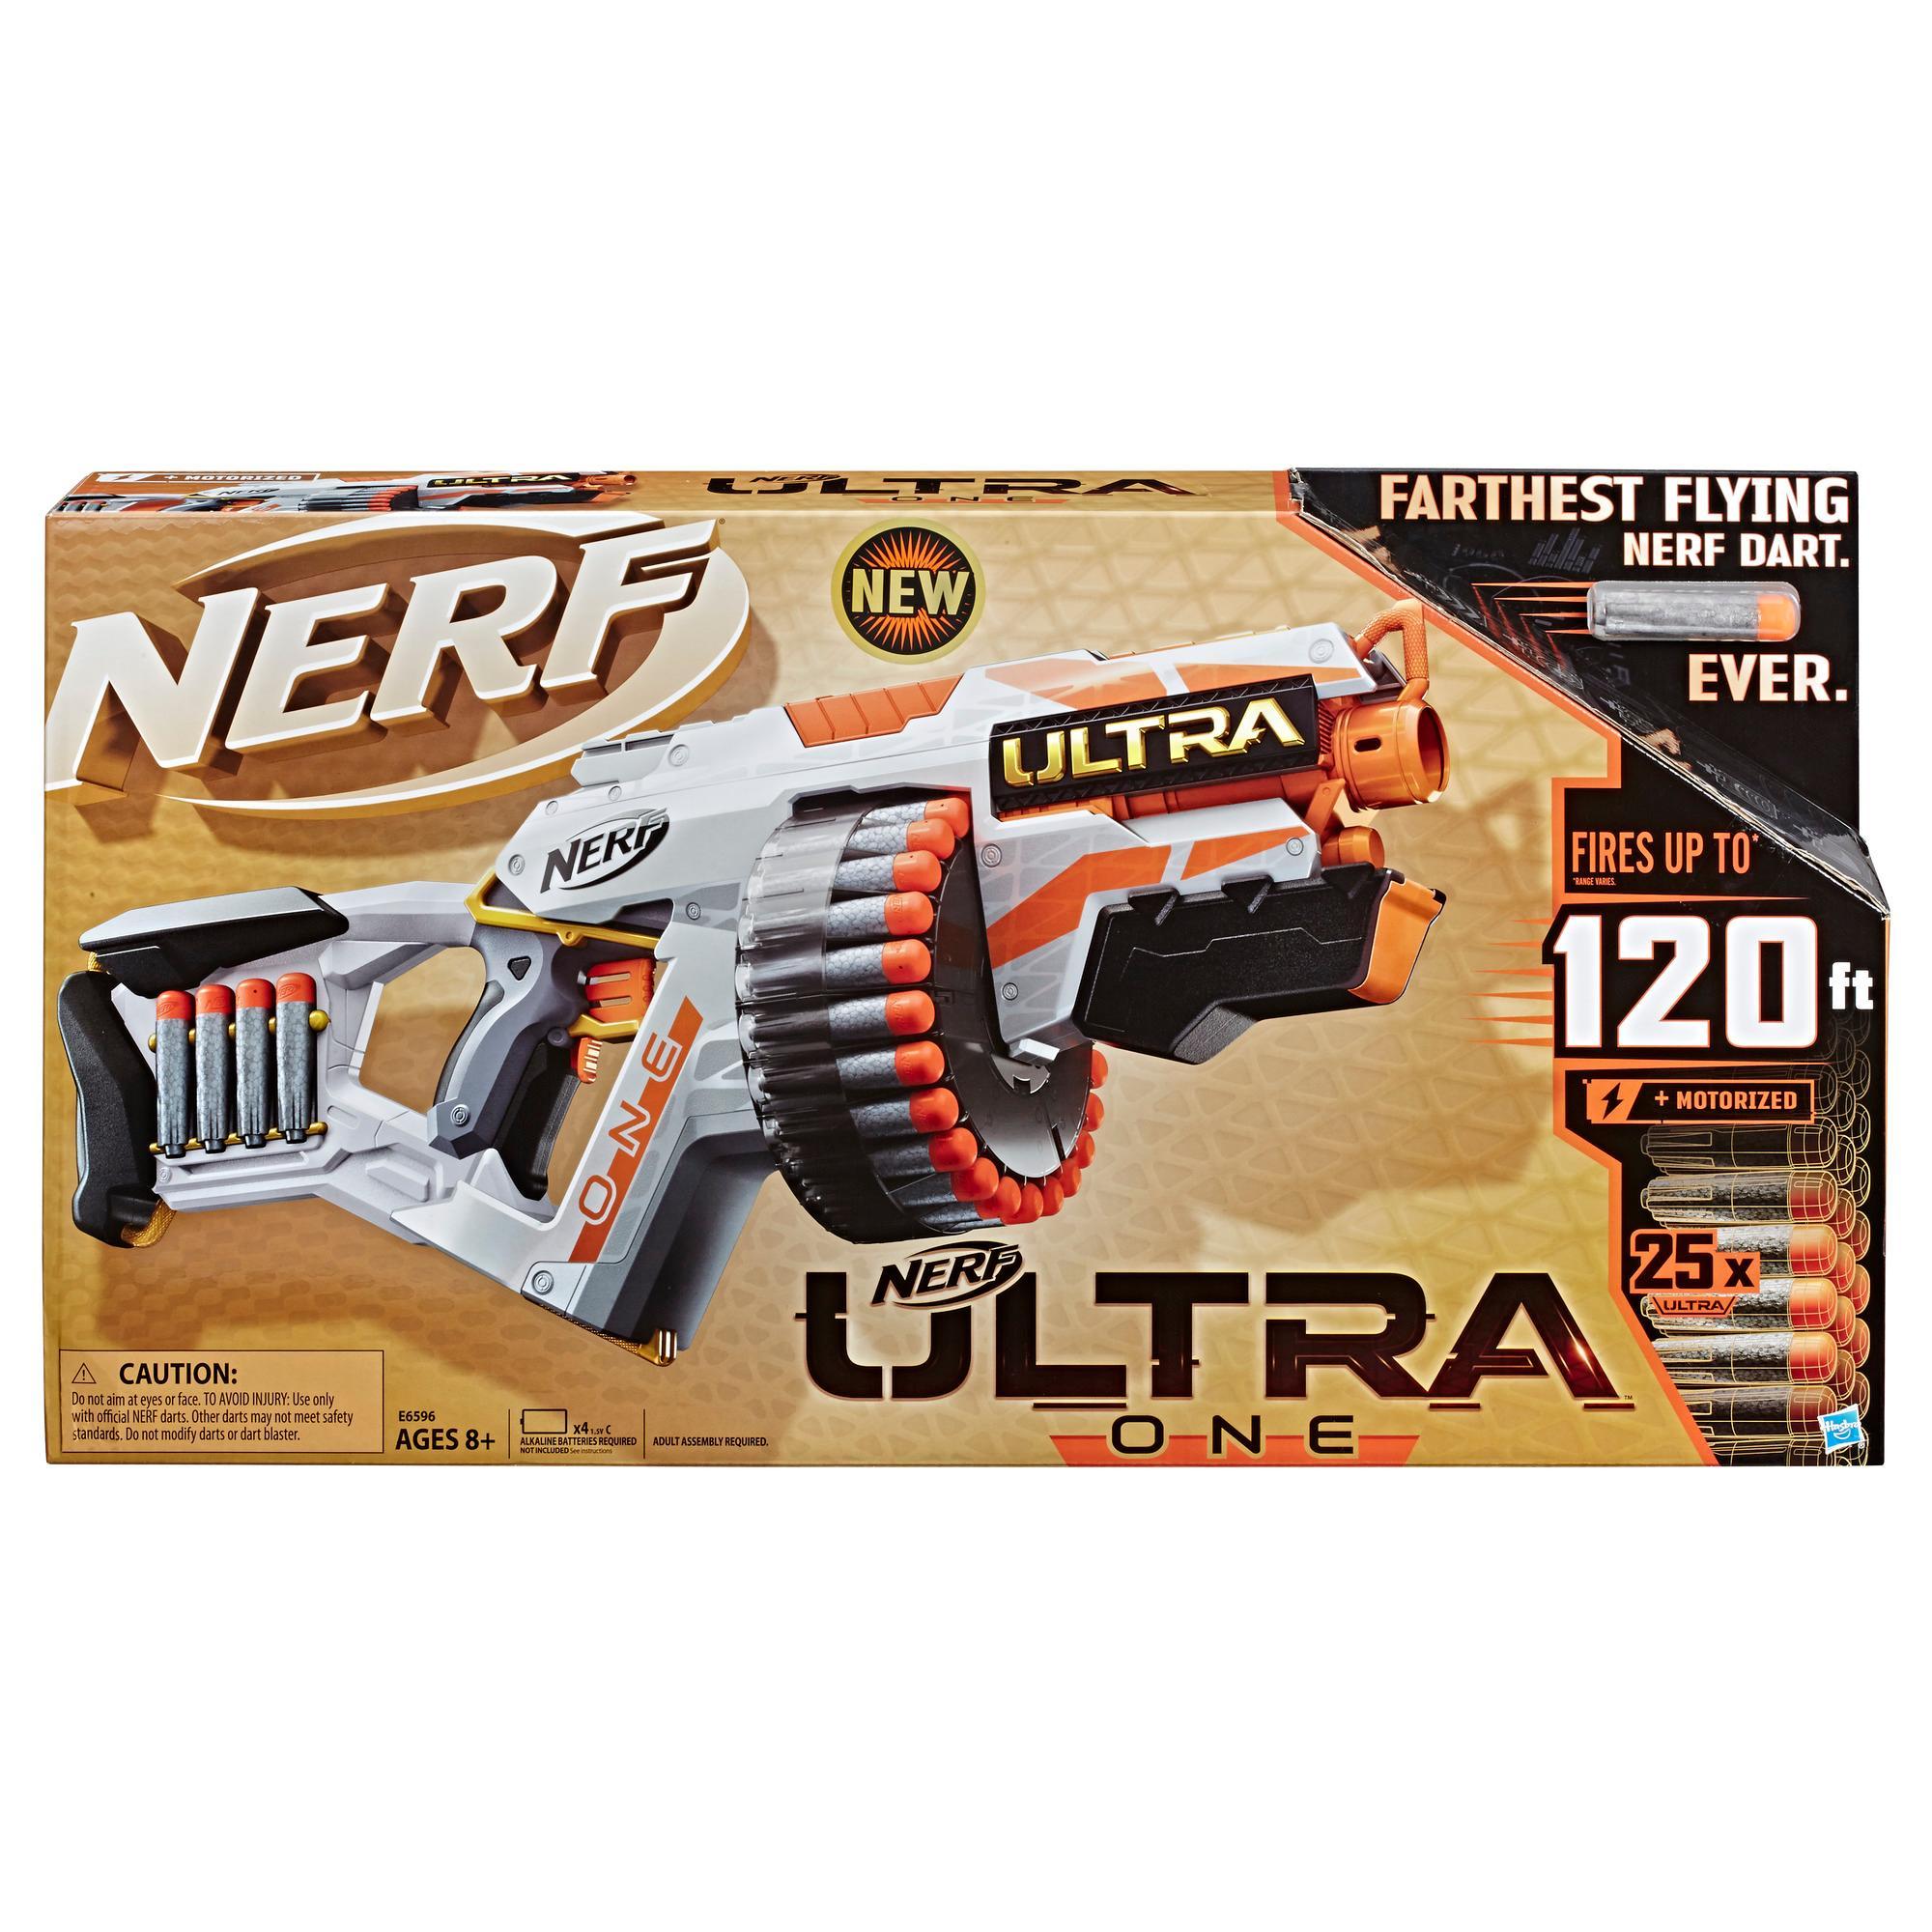 Nerf Ultra One Motorized Blaster -- High Capacity Drum -- 25 Official Nerf Ultra Darts, the Farthest Flying Nerf Darts product thumbnail 1